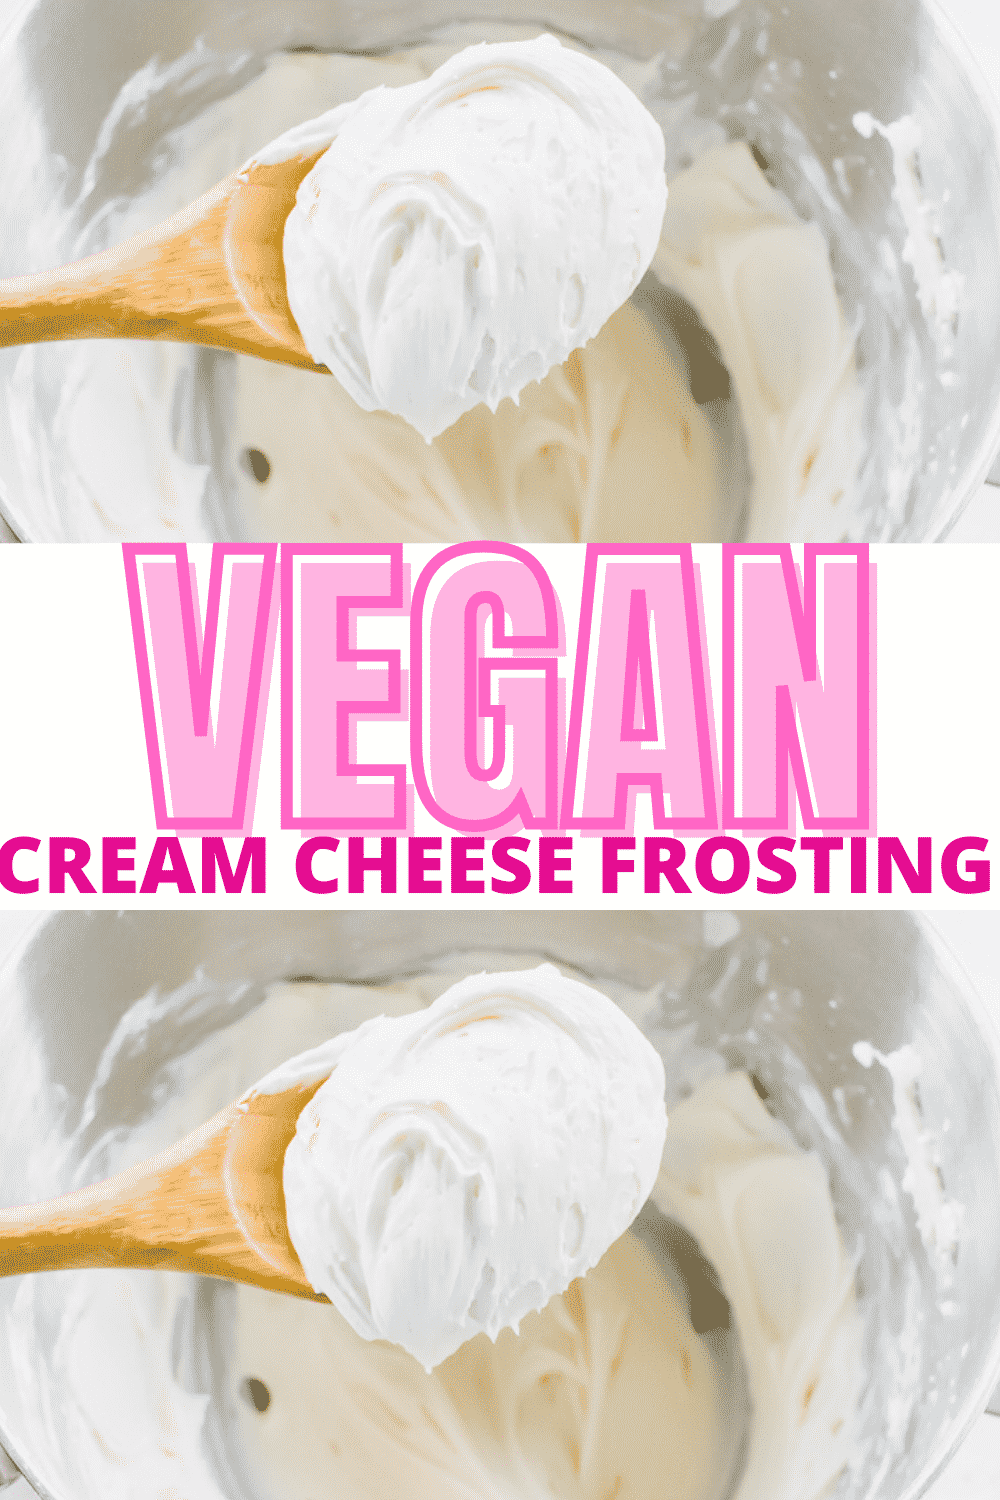 Whipped vegan cream cheese frosting on a wooden spoon with overlay text